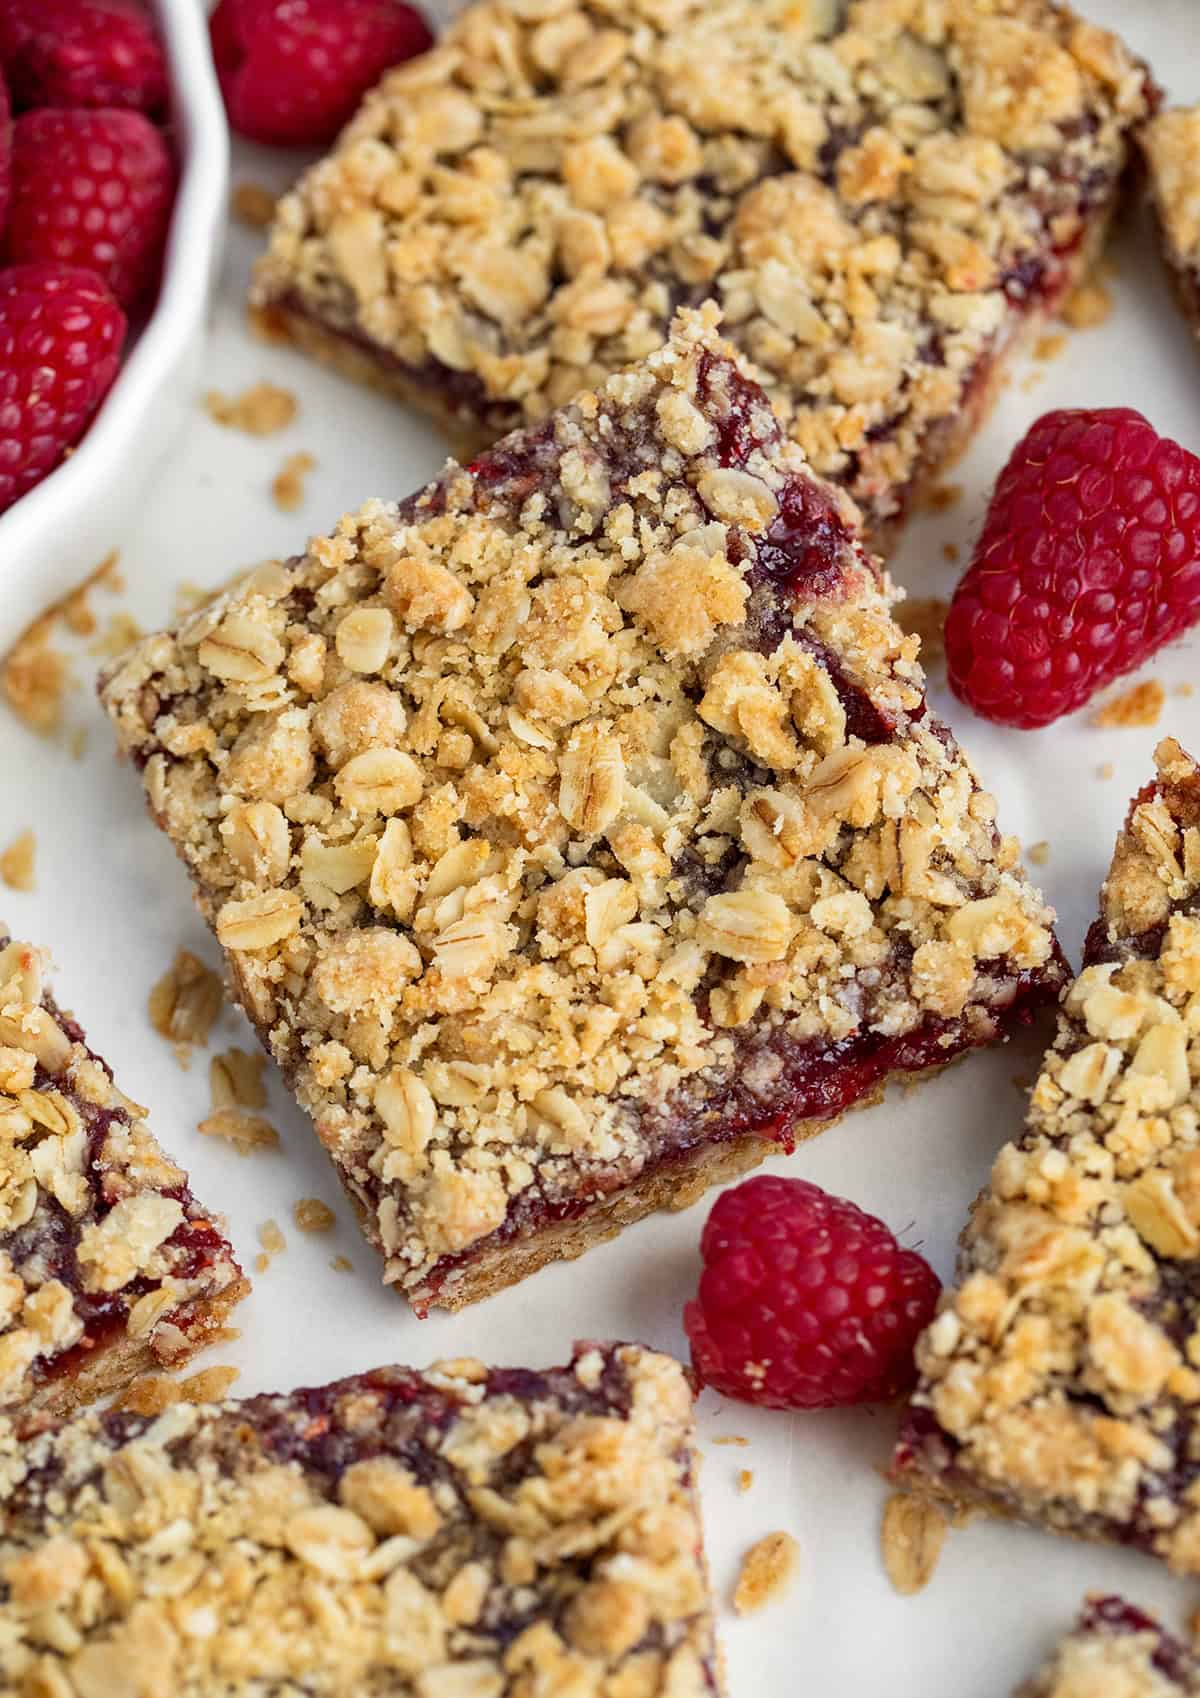 Scattered Raspberry Oatmeal Crumble Bars on a white table.